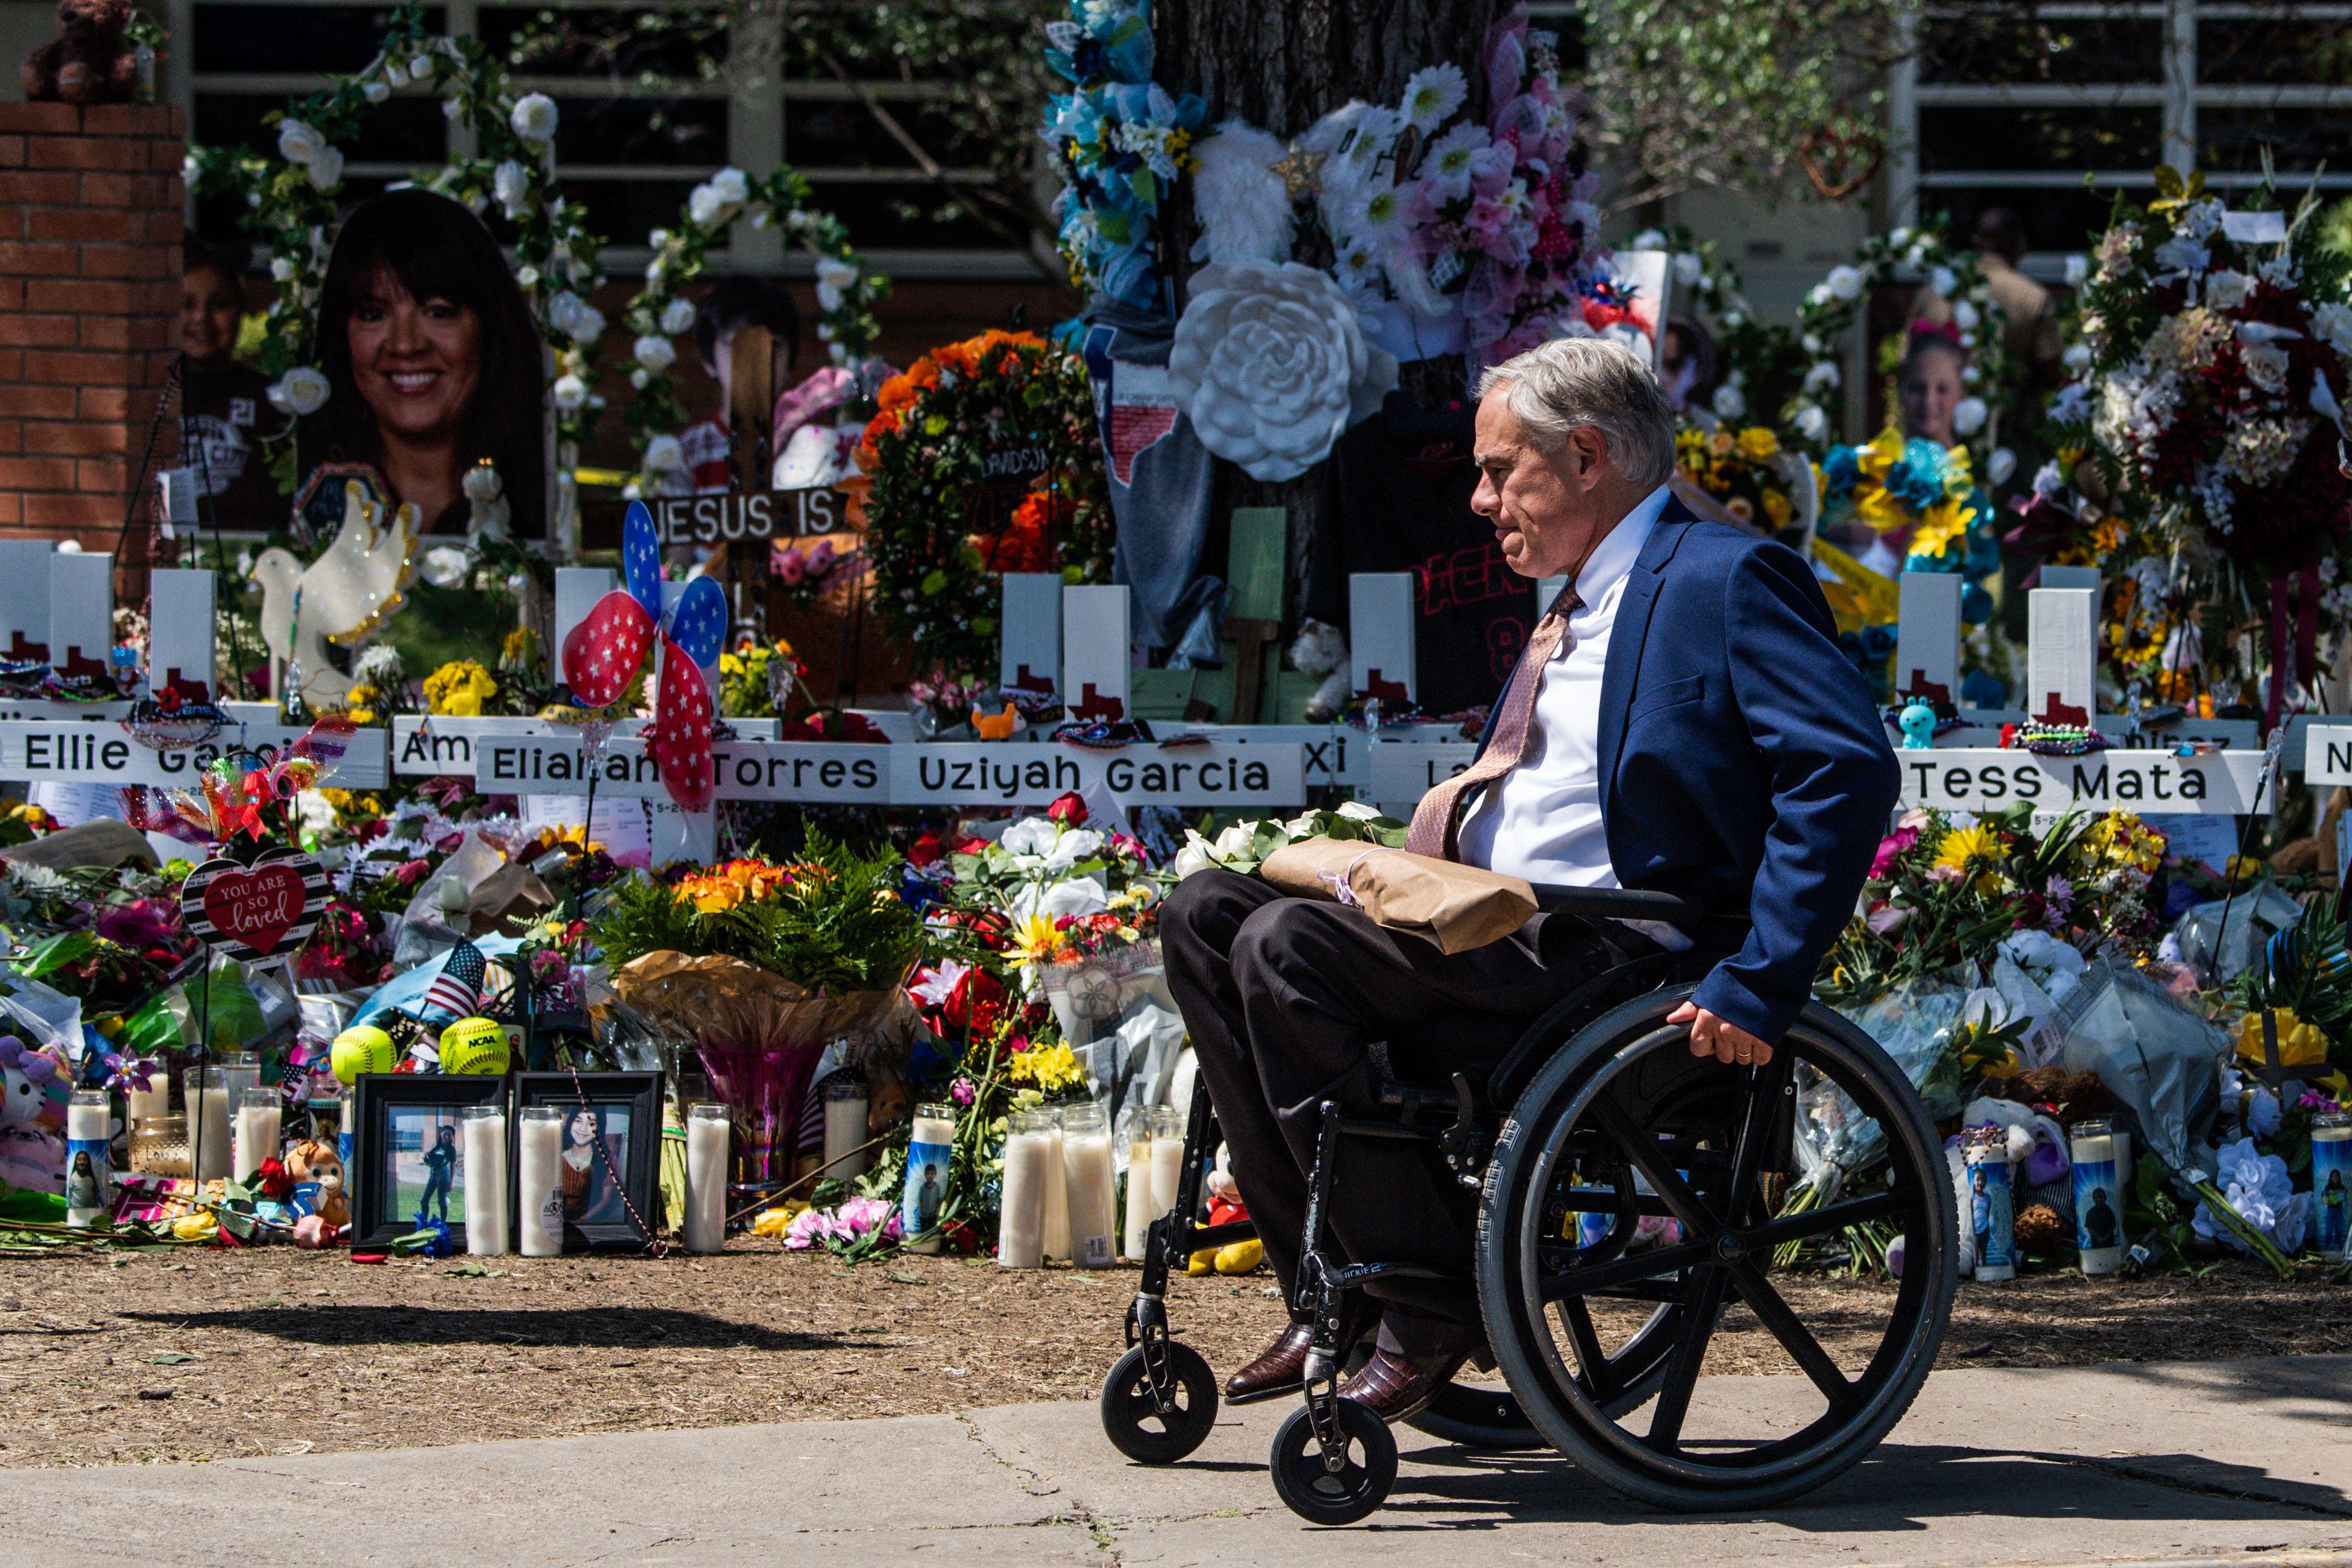 A man in a wheelchair in front of a memorial of candles and flowers outside the elementary school.